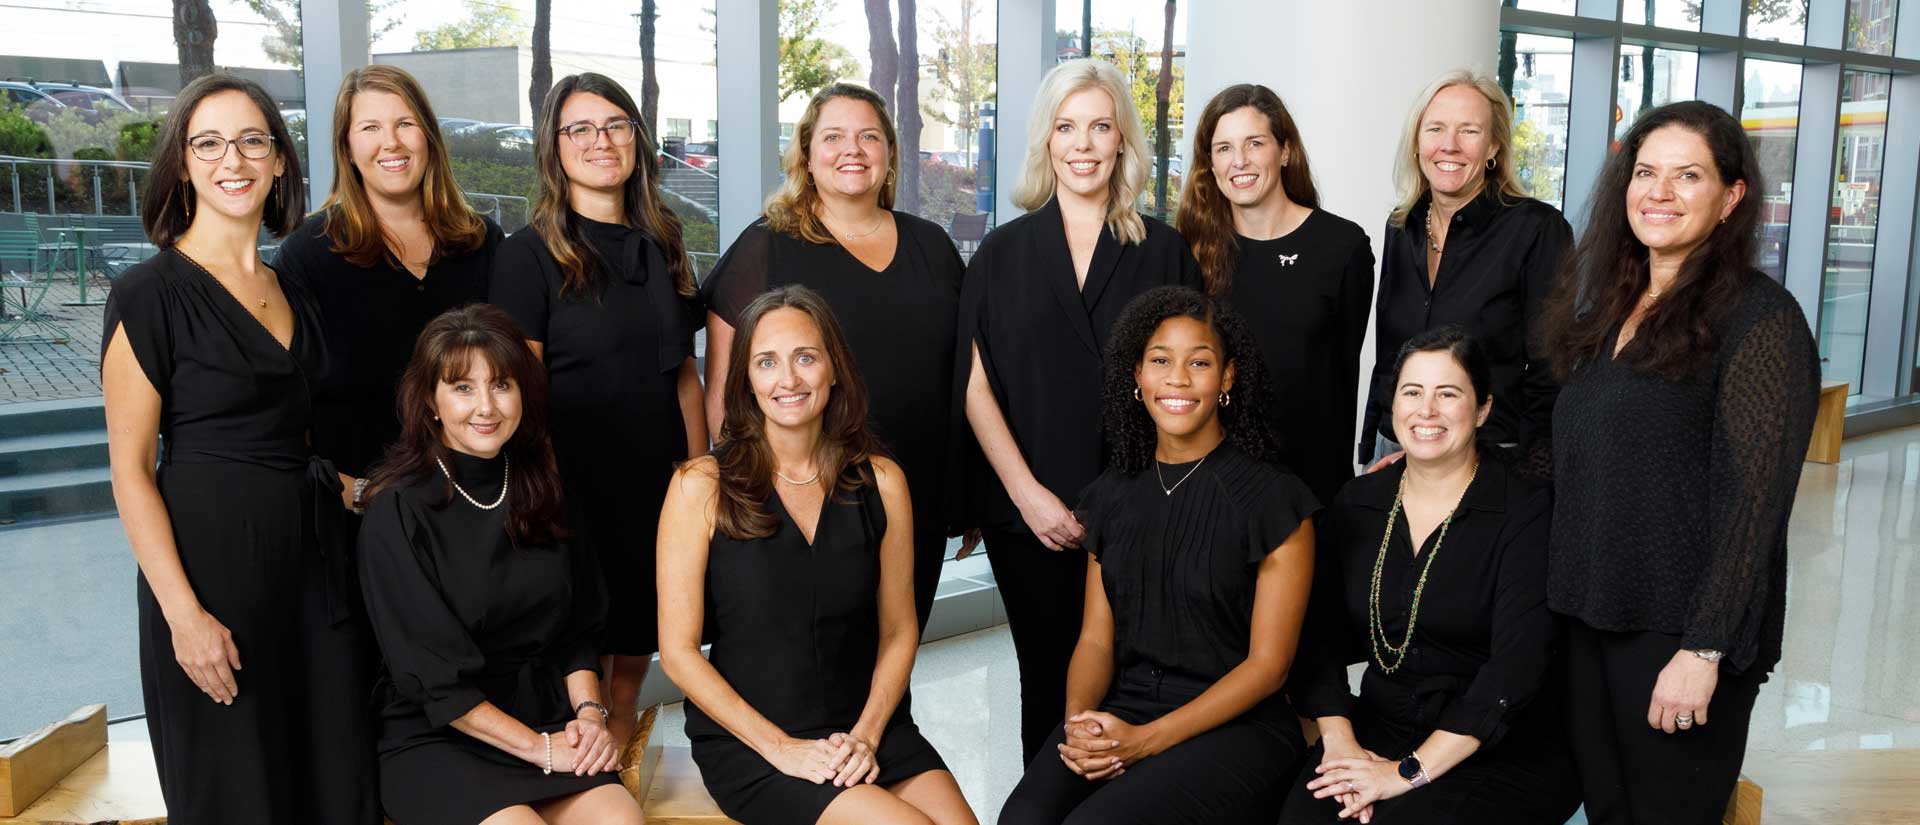 Provider group photo for Piedmont OB-GYN | A division of Atlanta Women's Healthcare Specialists, LLC